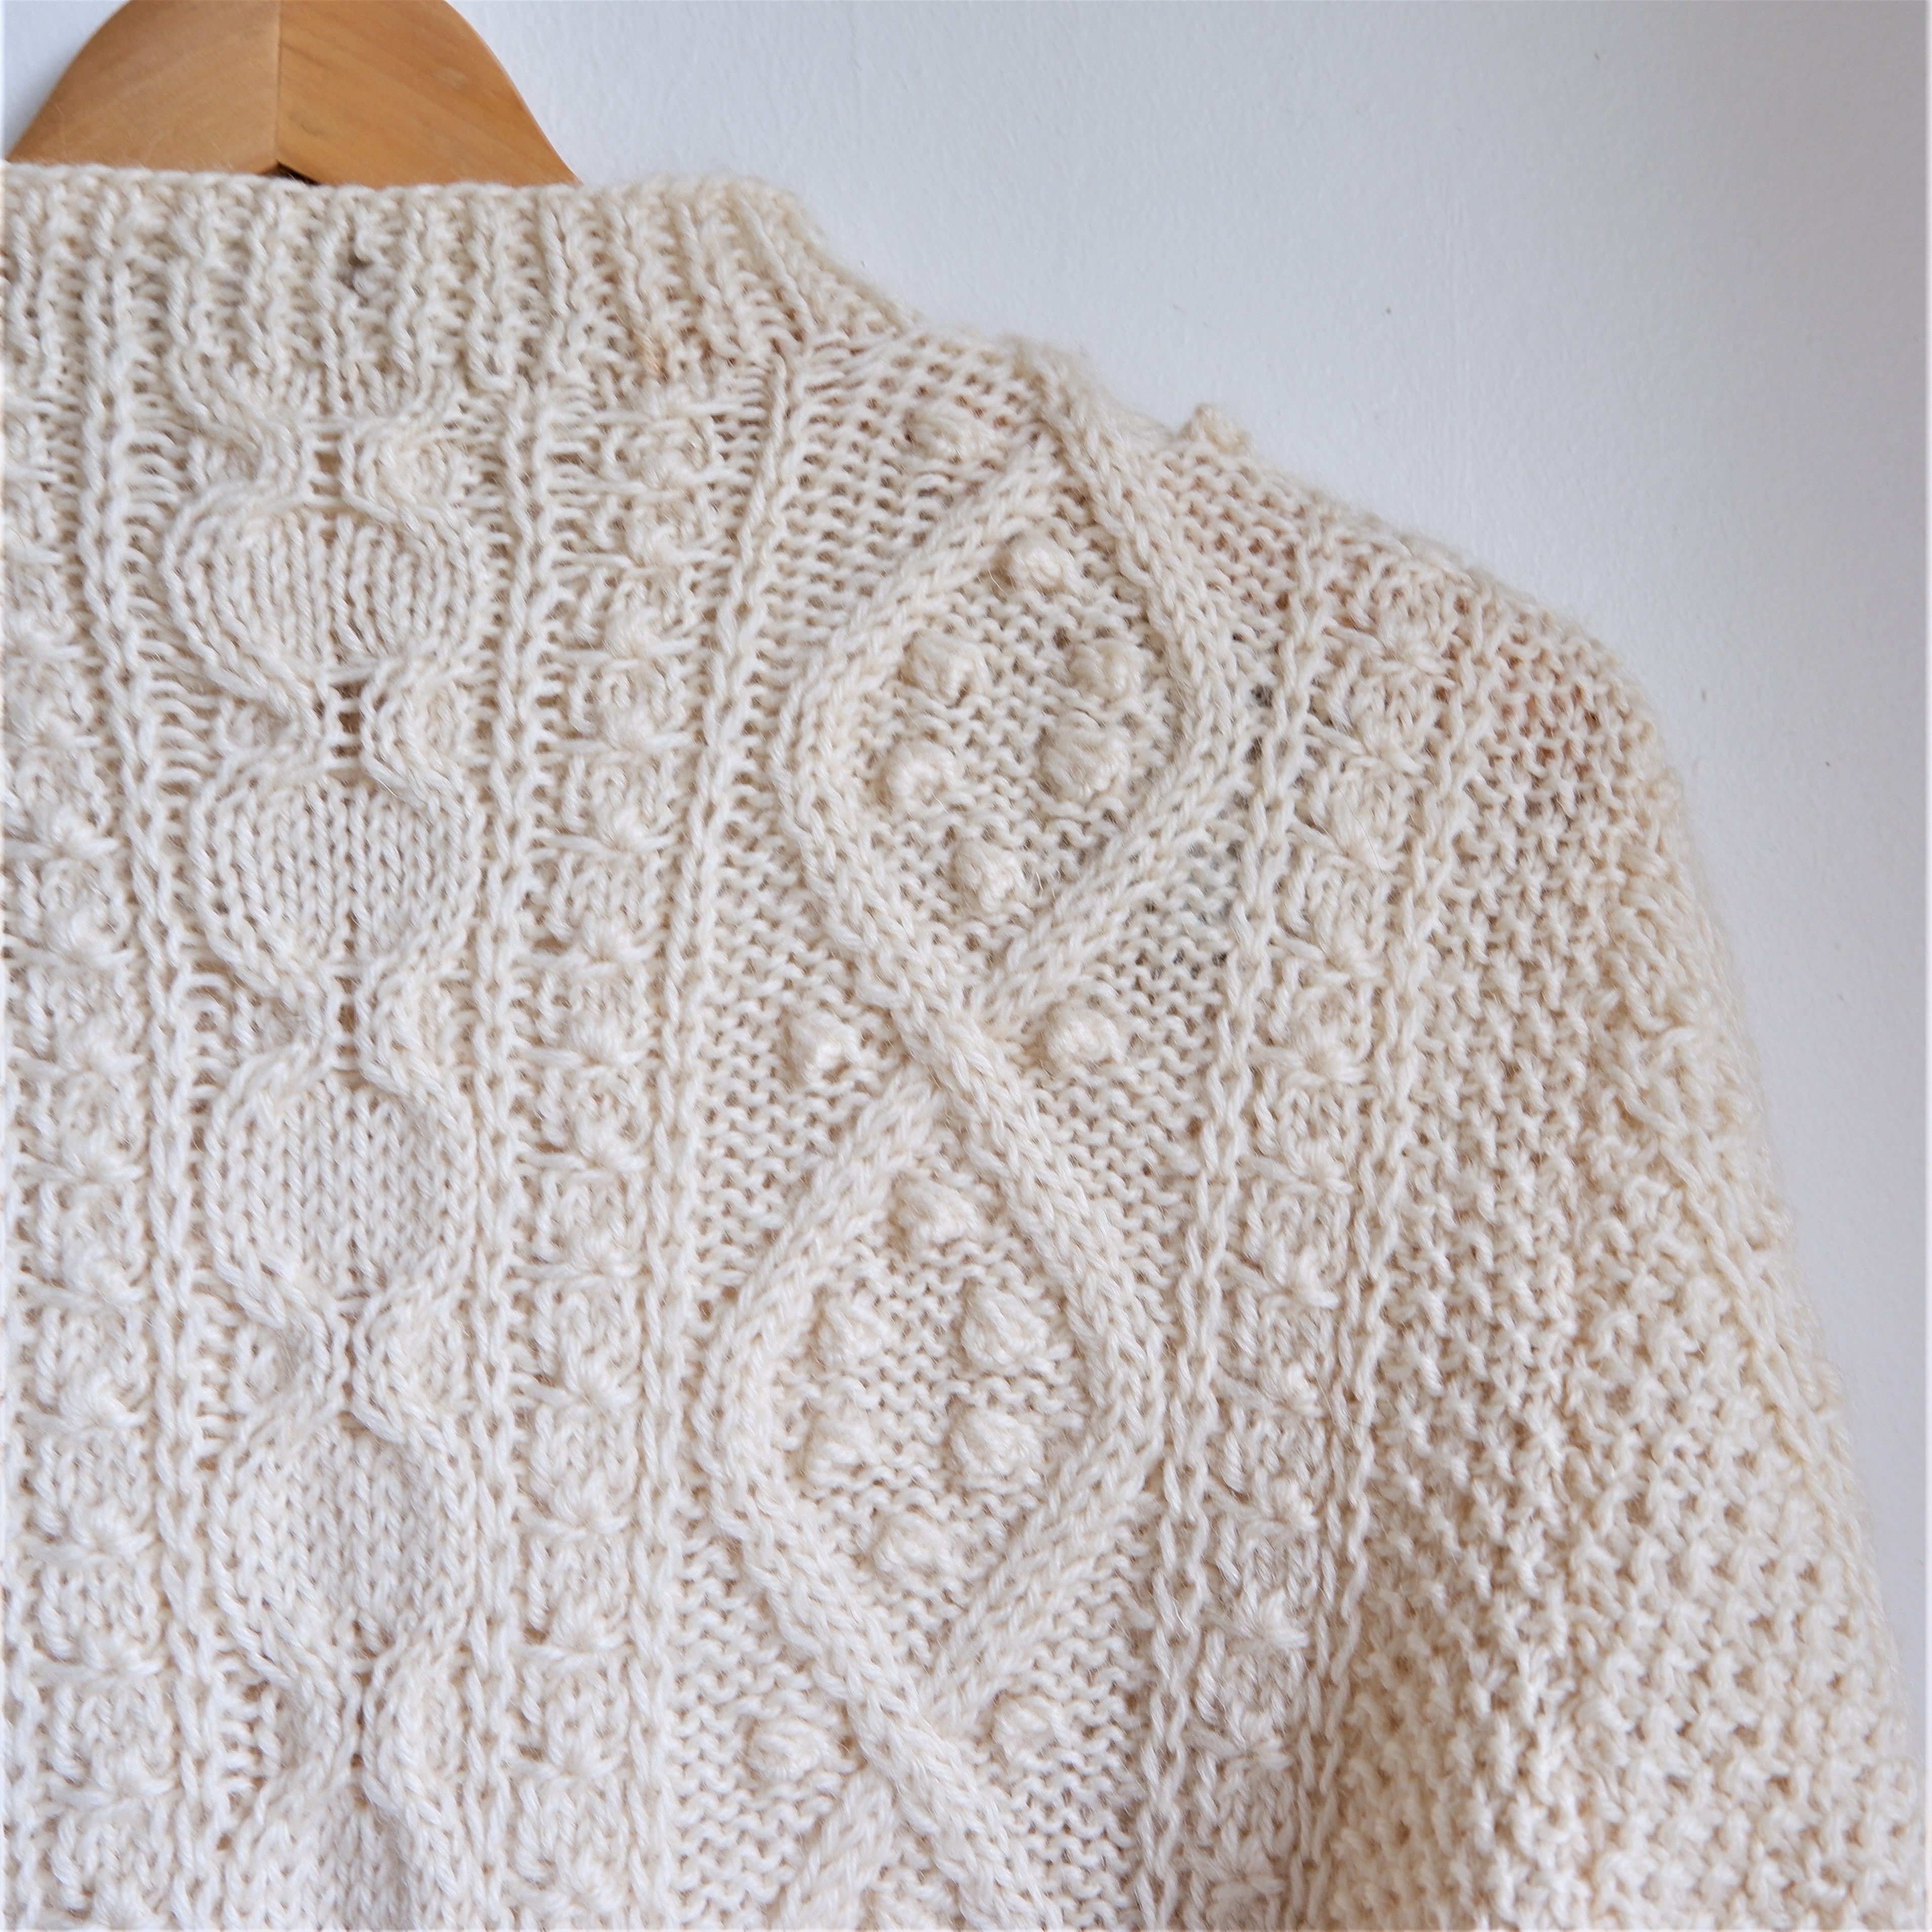 VINTAGE: Classic Cable Knit Cardigan.